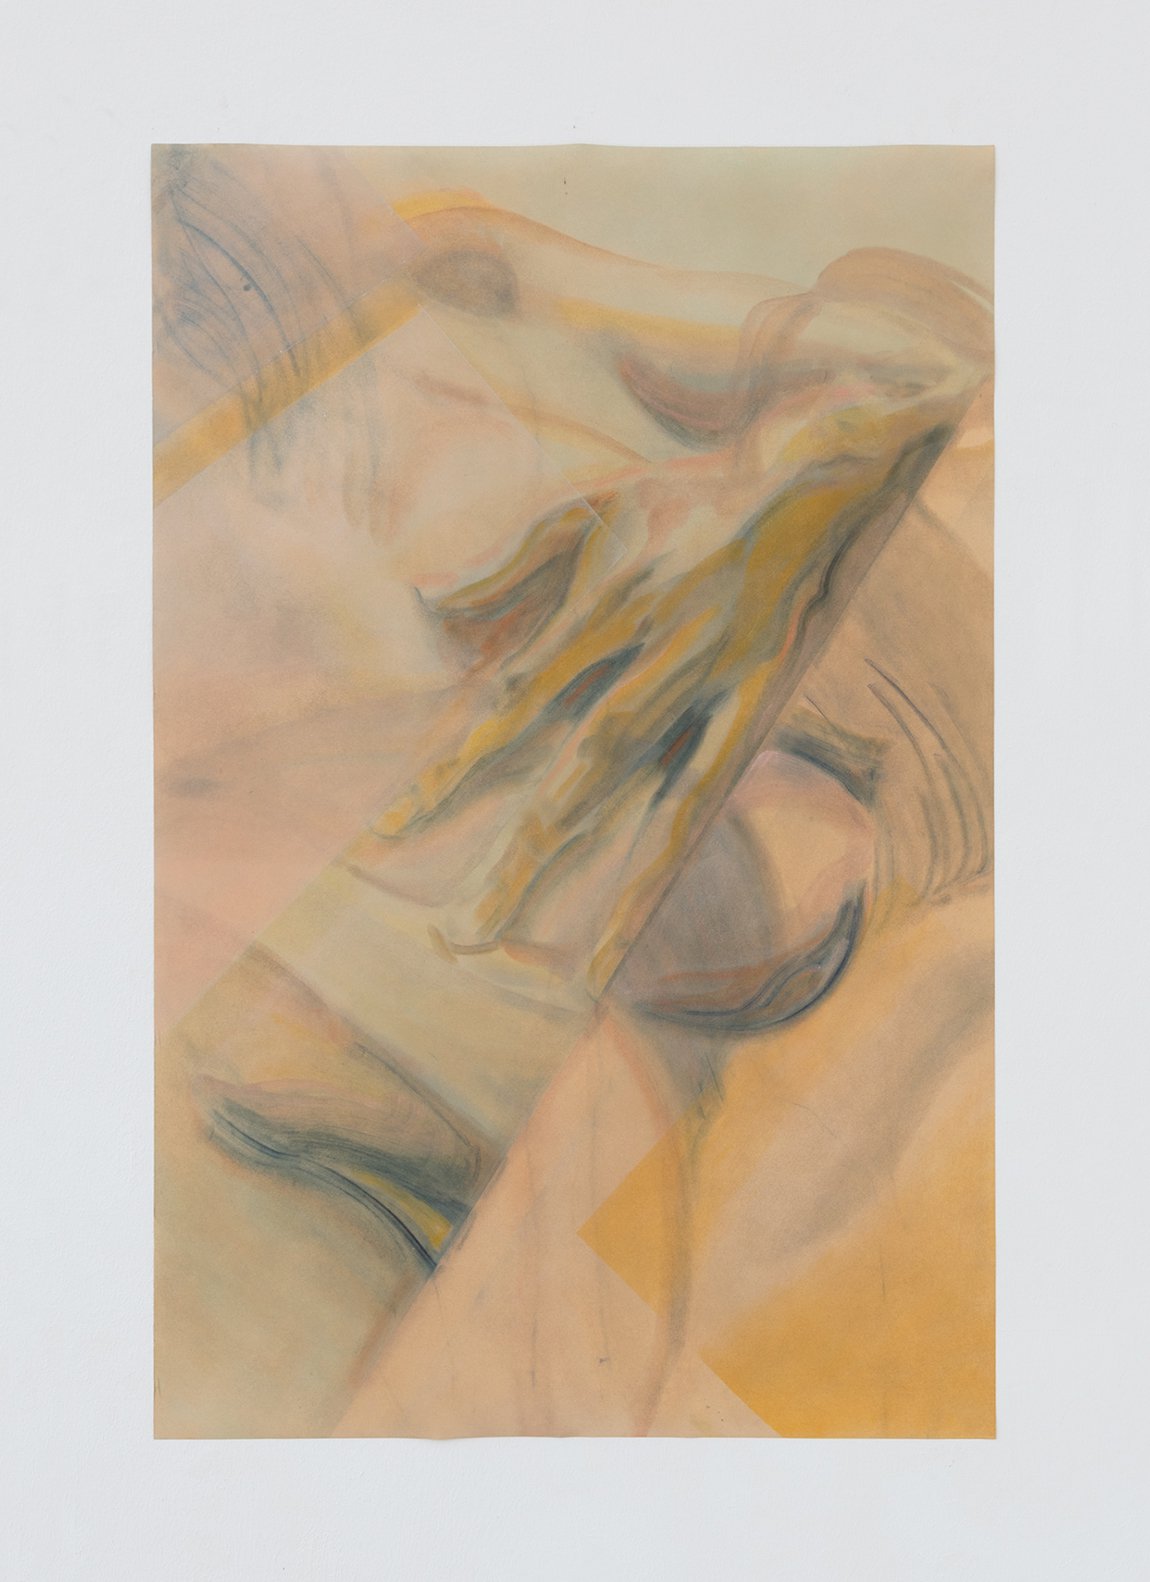 Evelyn PlaschgI shed, 2021Pigment on paper102 x 67,5 cm